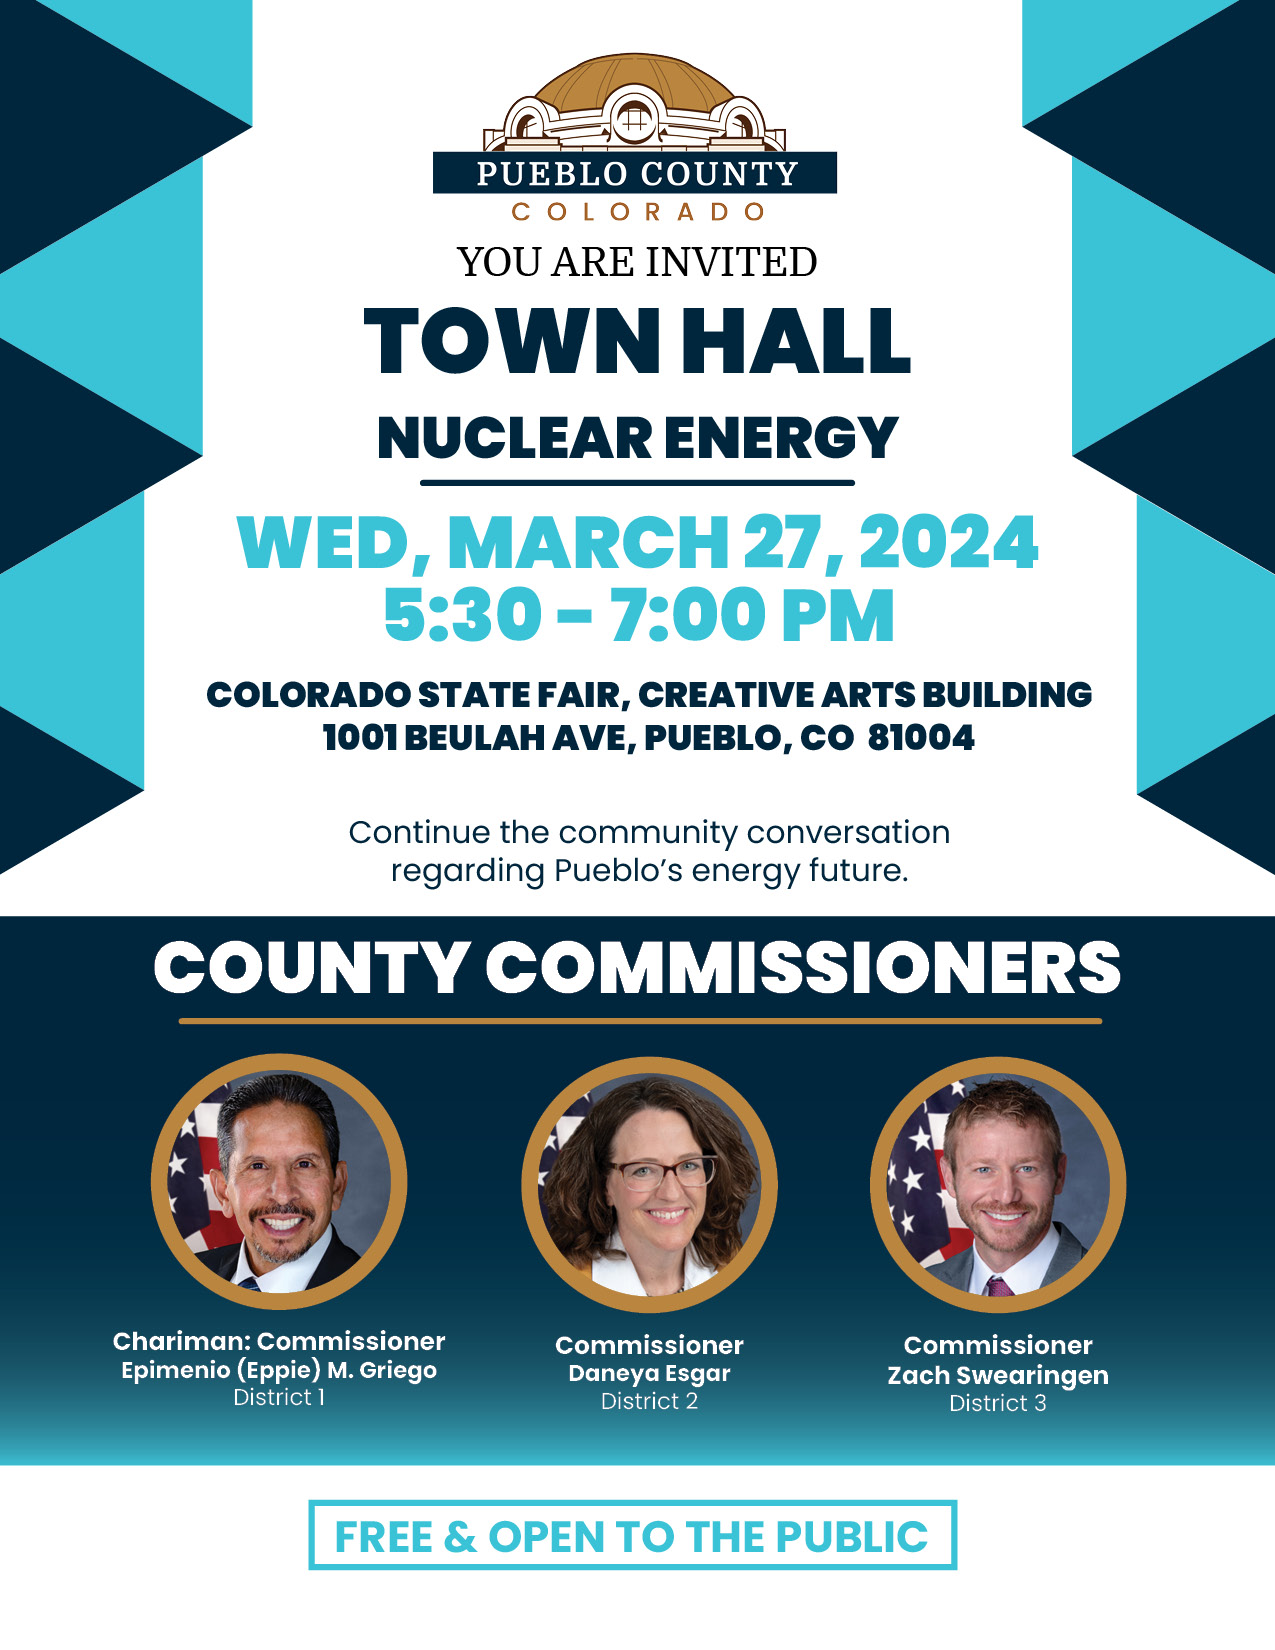 Town Hall on Nuclear Energy: Wed, March 27, 2024 from 5:30 to 7pm, Colorado State Fair Creative Arts Building, 10001 Beulah Ave